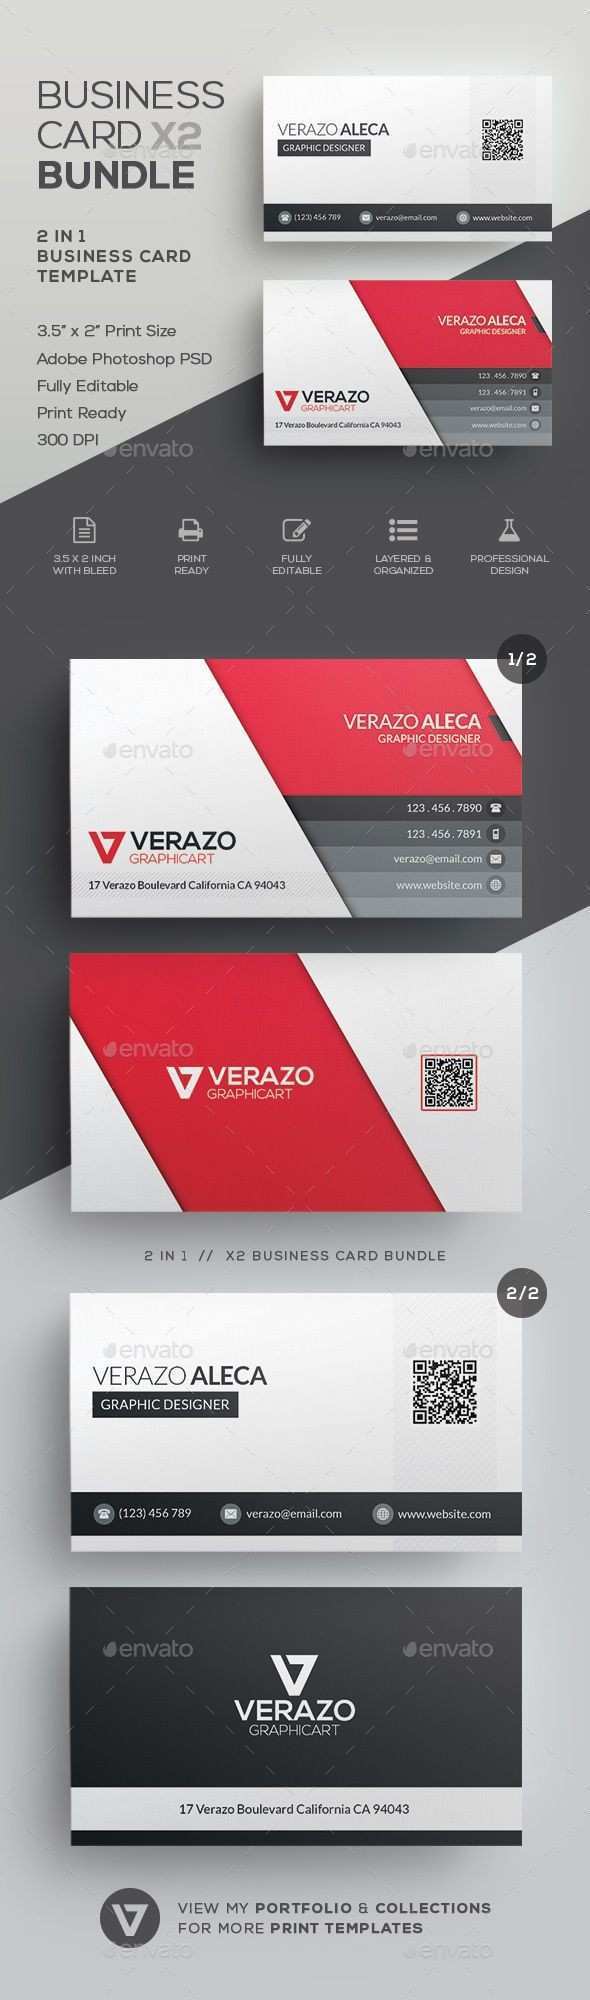 91 Visiting Download Ibm Business Card Template Free PSD File for Download Ibm Business Card Template Free